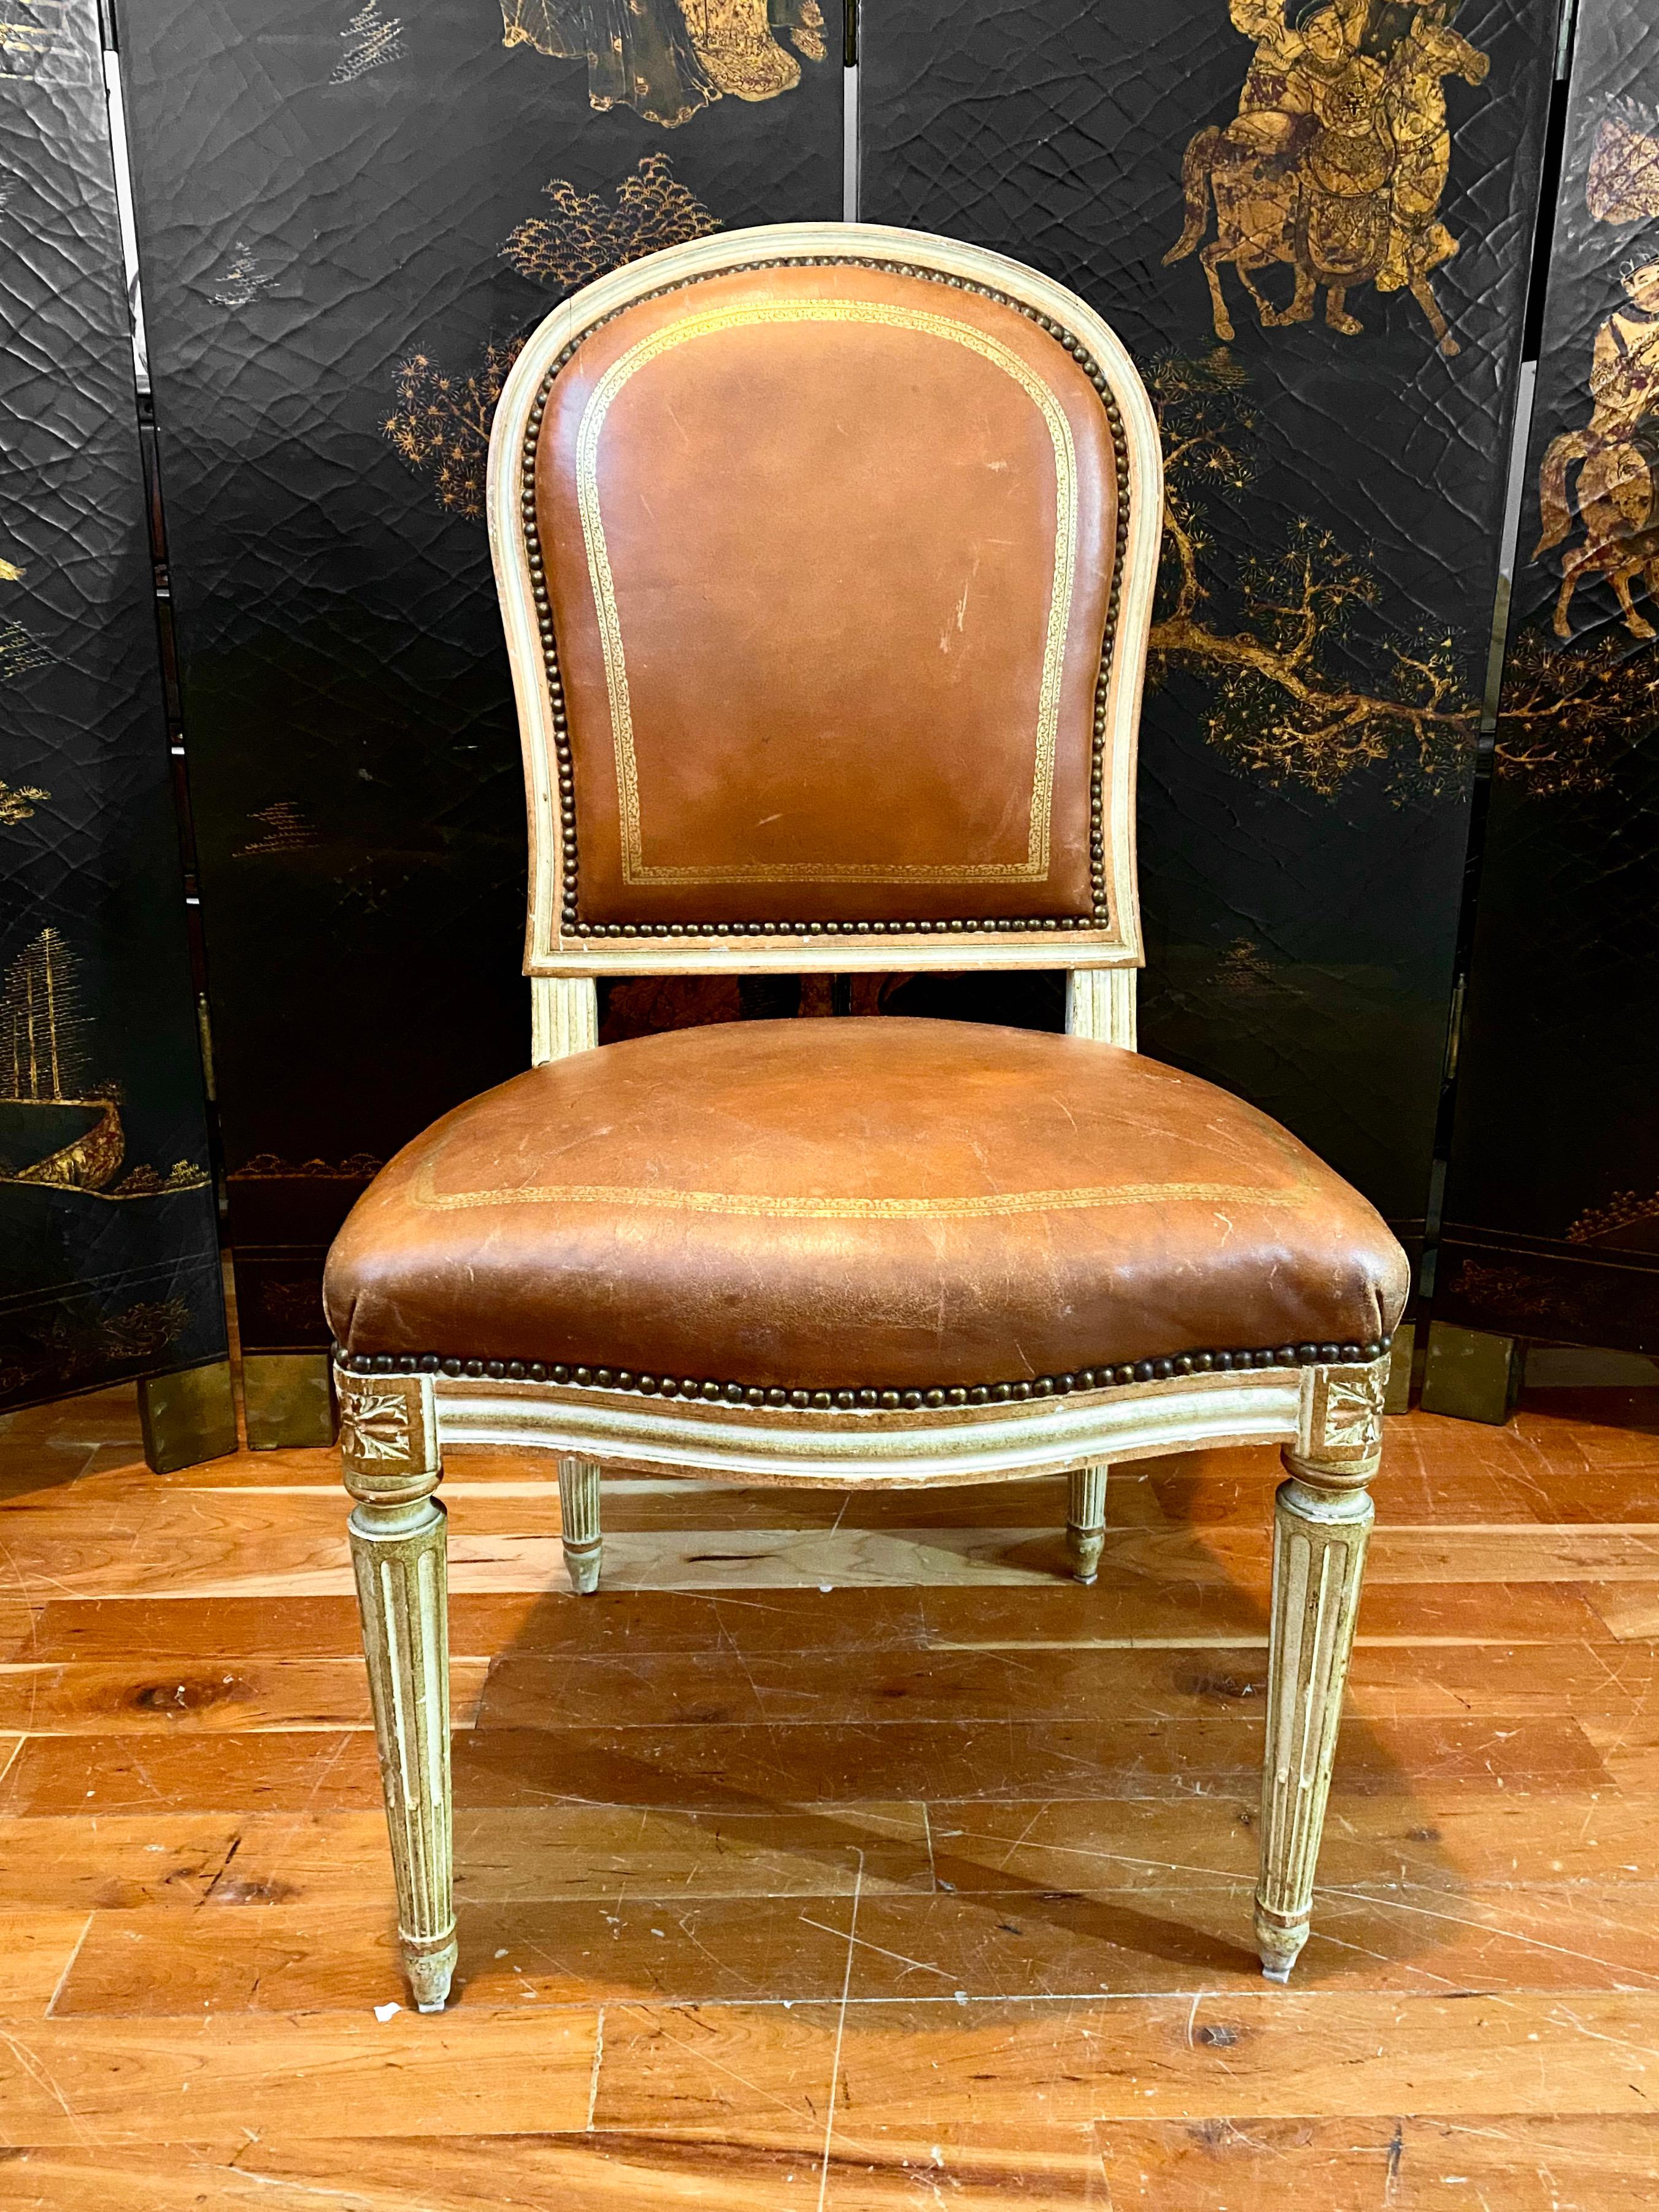 French Louis XVI style chair, tooled and gilt leather. 
White-lacquered chair atop four tapered, fluted legs, based on a horse shoe-shaped model by Georges Jacob, famed seat maker to King Louis XVI. Georges Jacob was one of the two most prominent